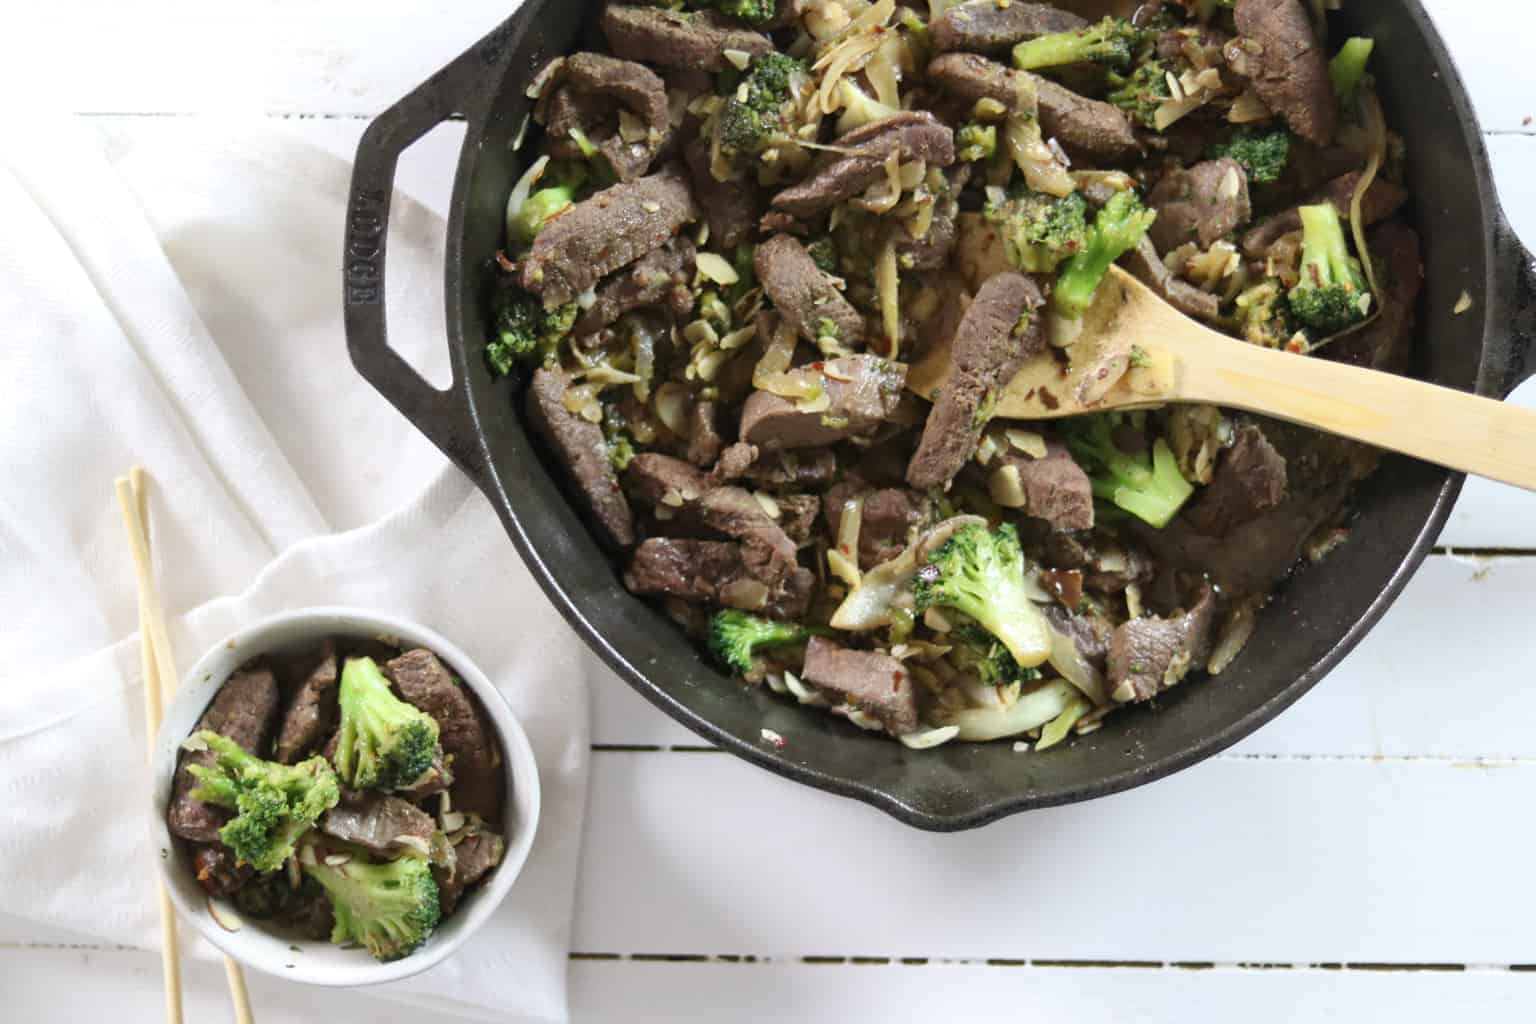 Cast iron skillet with broccoli and beef on white wooden table.